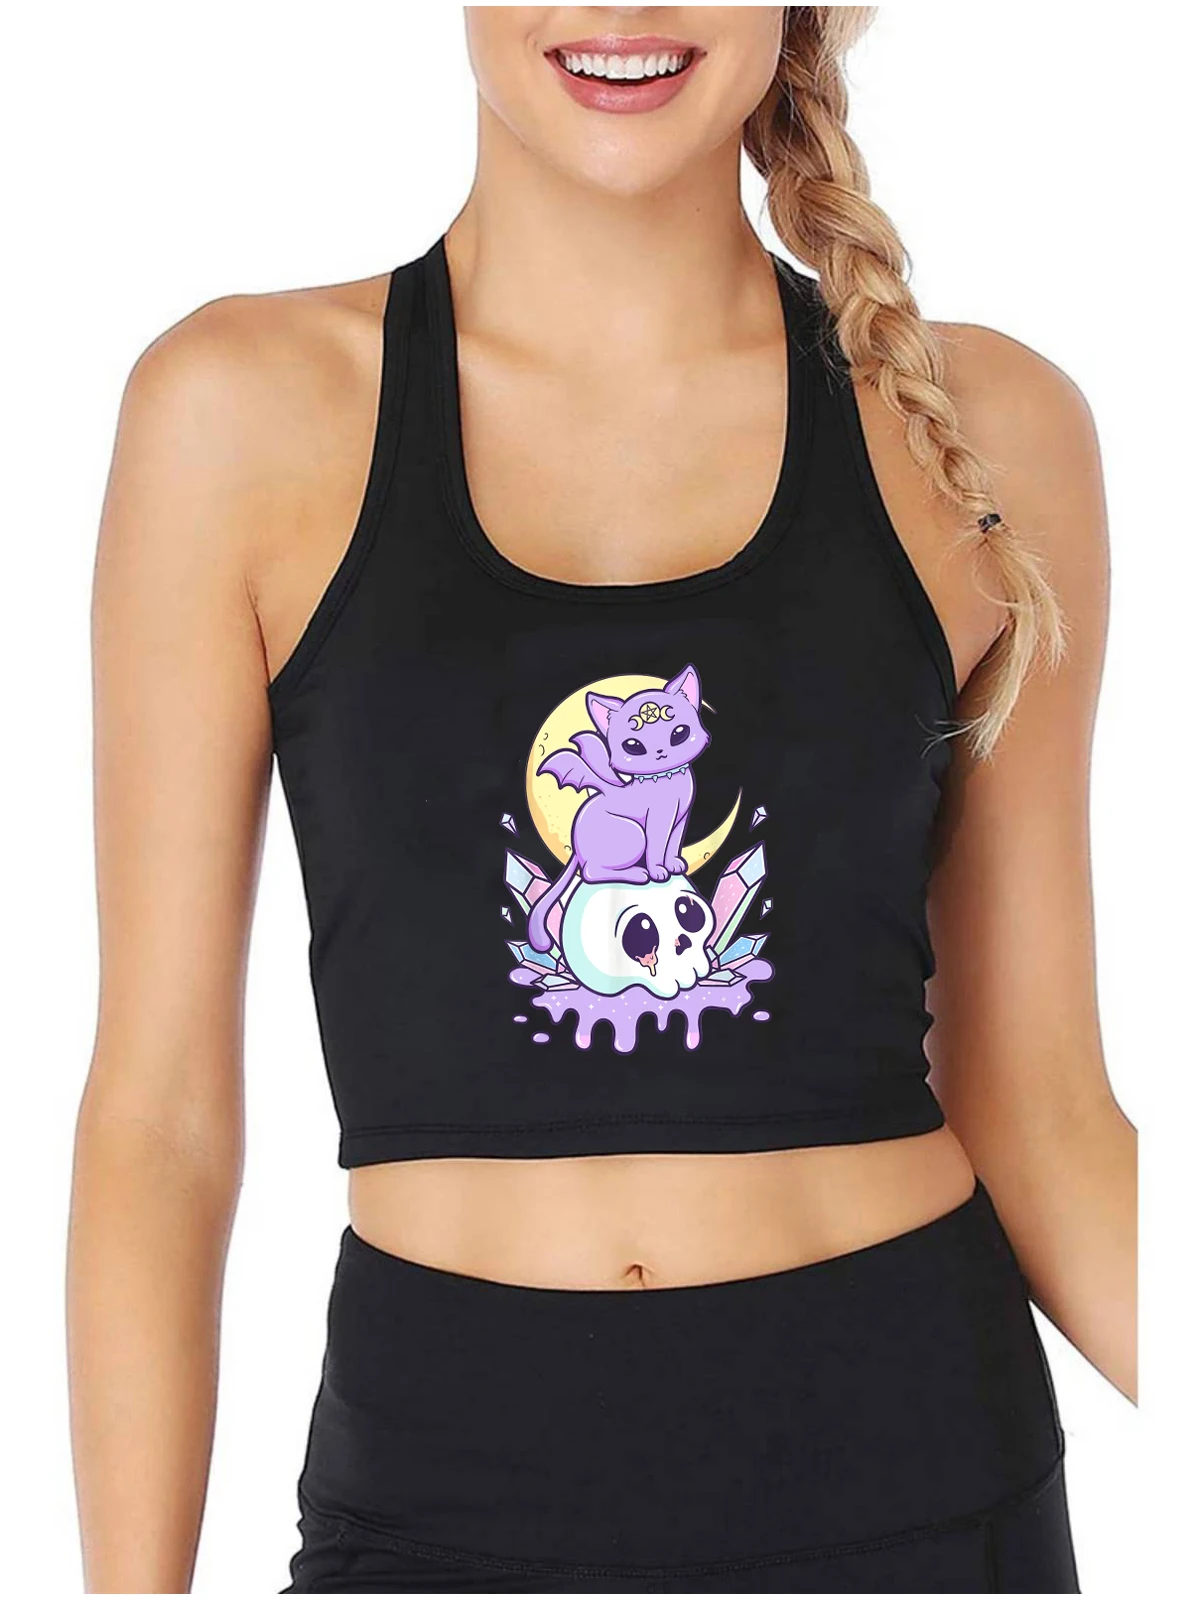 

Witchy Cat And Skull Graphics Sexy Slim Fit Crop Top Pastel Goth Creepy Demon Design Tank Tops Girl's Satan Cat Camisole